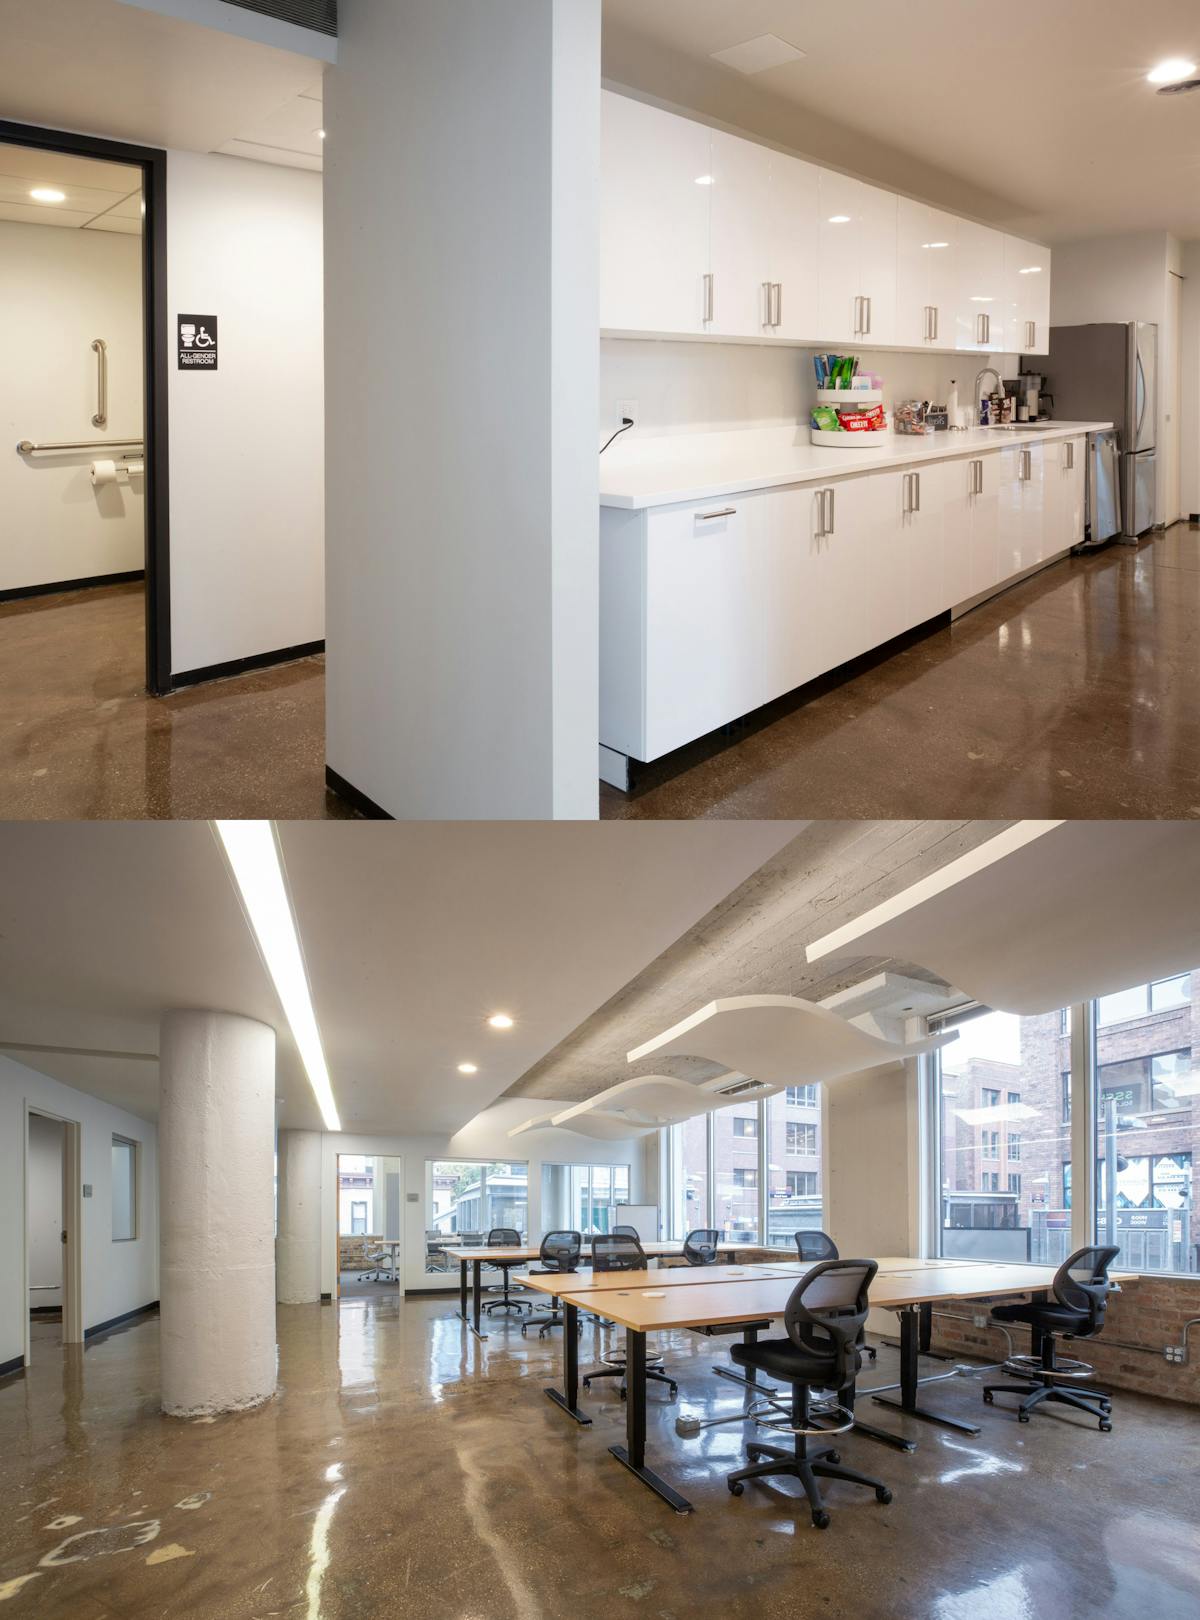 A handicap accessible bathroom, a kitchen with cupboards, refreshments, and a refridgerator, and a workspace with multiple long tables surrounded by chairs, with large windows looking out into the city.